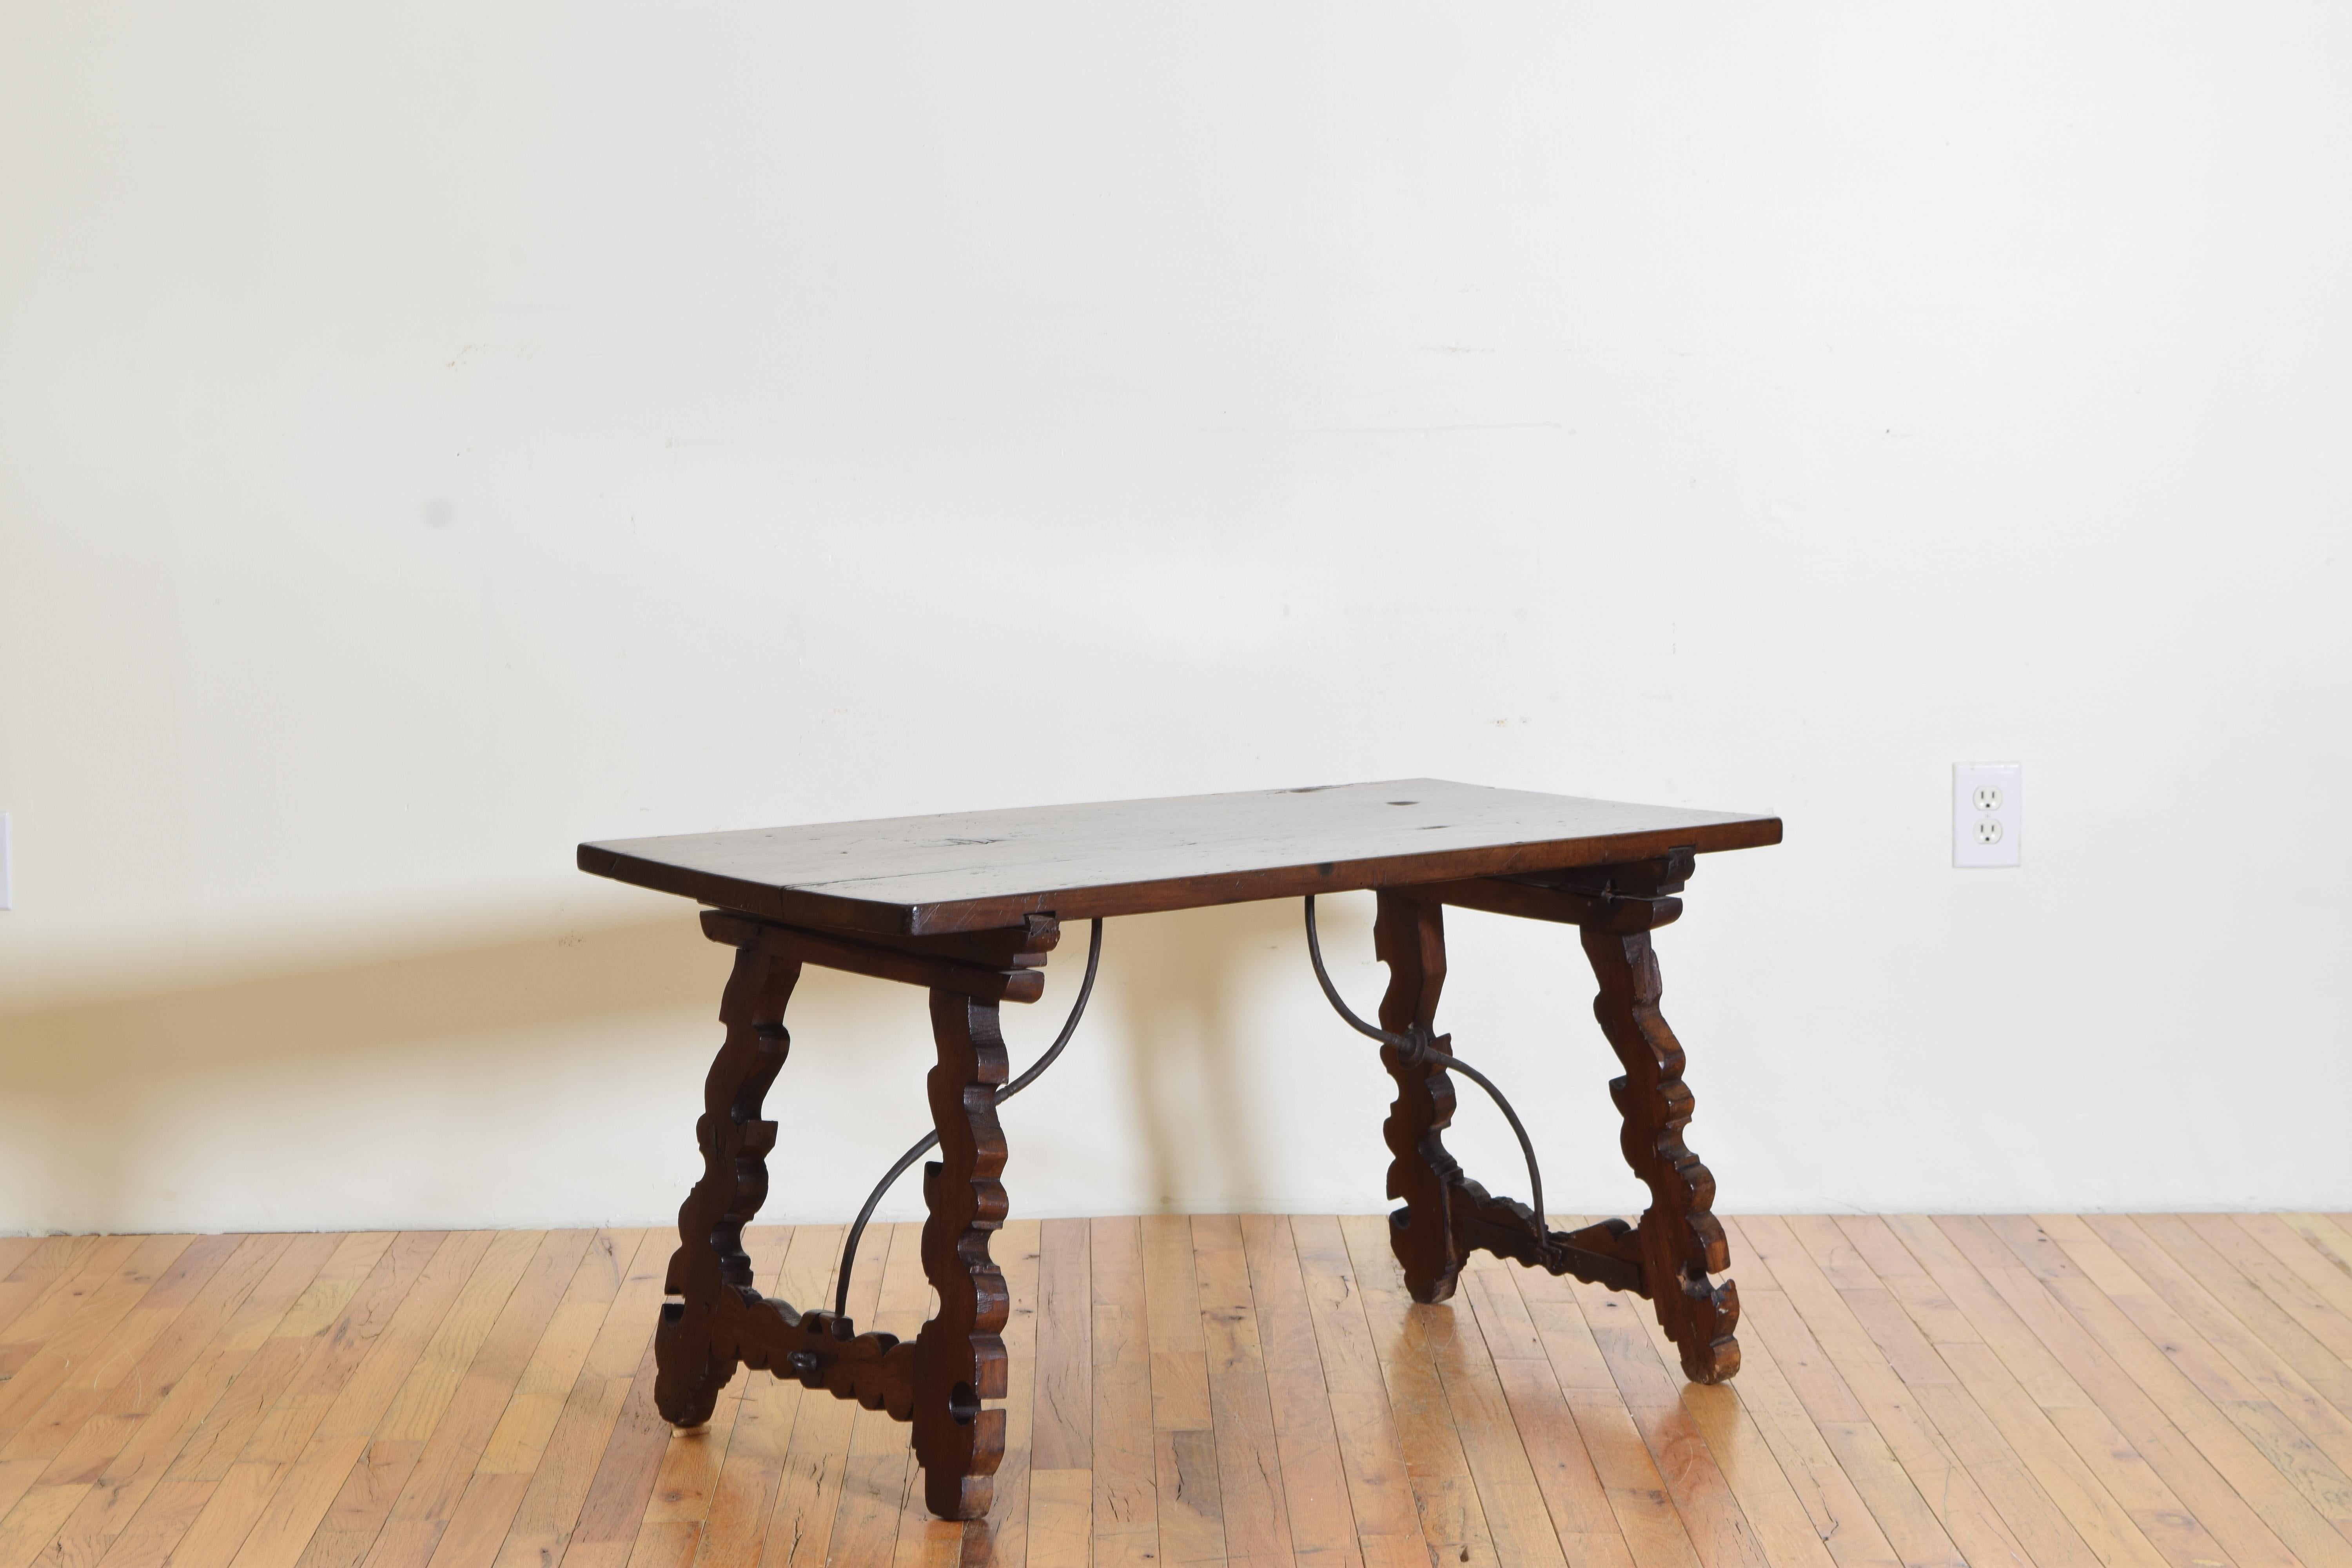 Often called lyre tables this one is of coffee table size, likely constructed from antique elements, the rectangular top raised on carved trestle supports joined by iron stretchers.